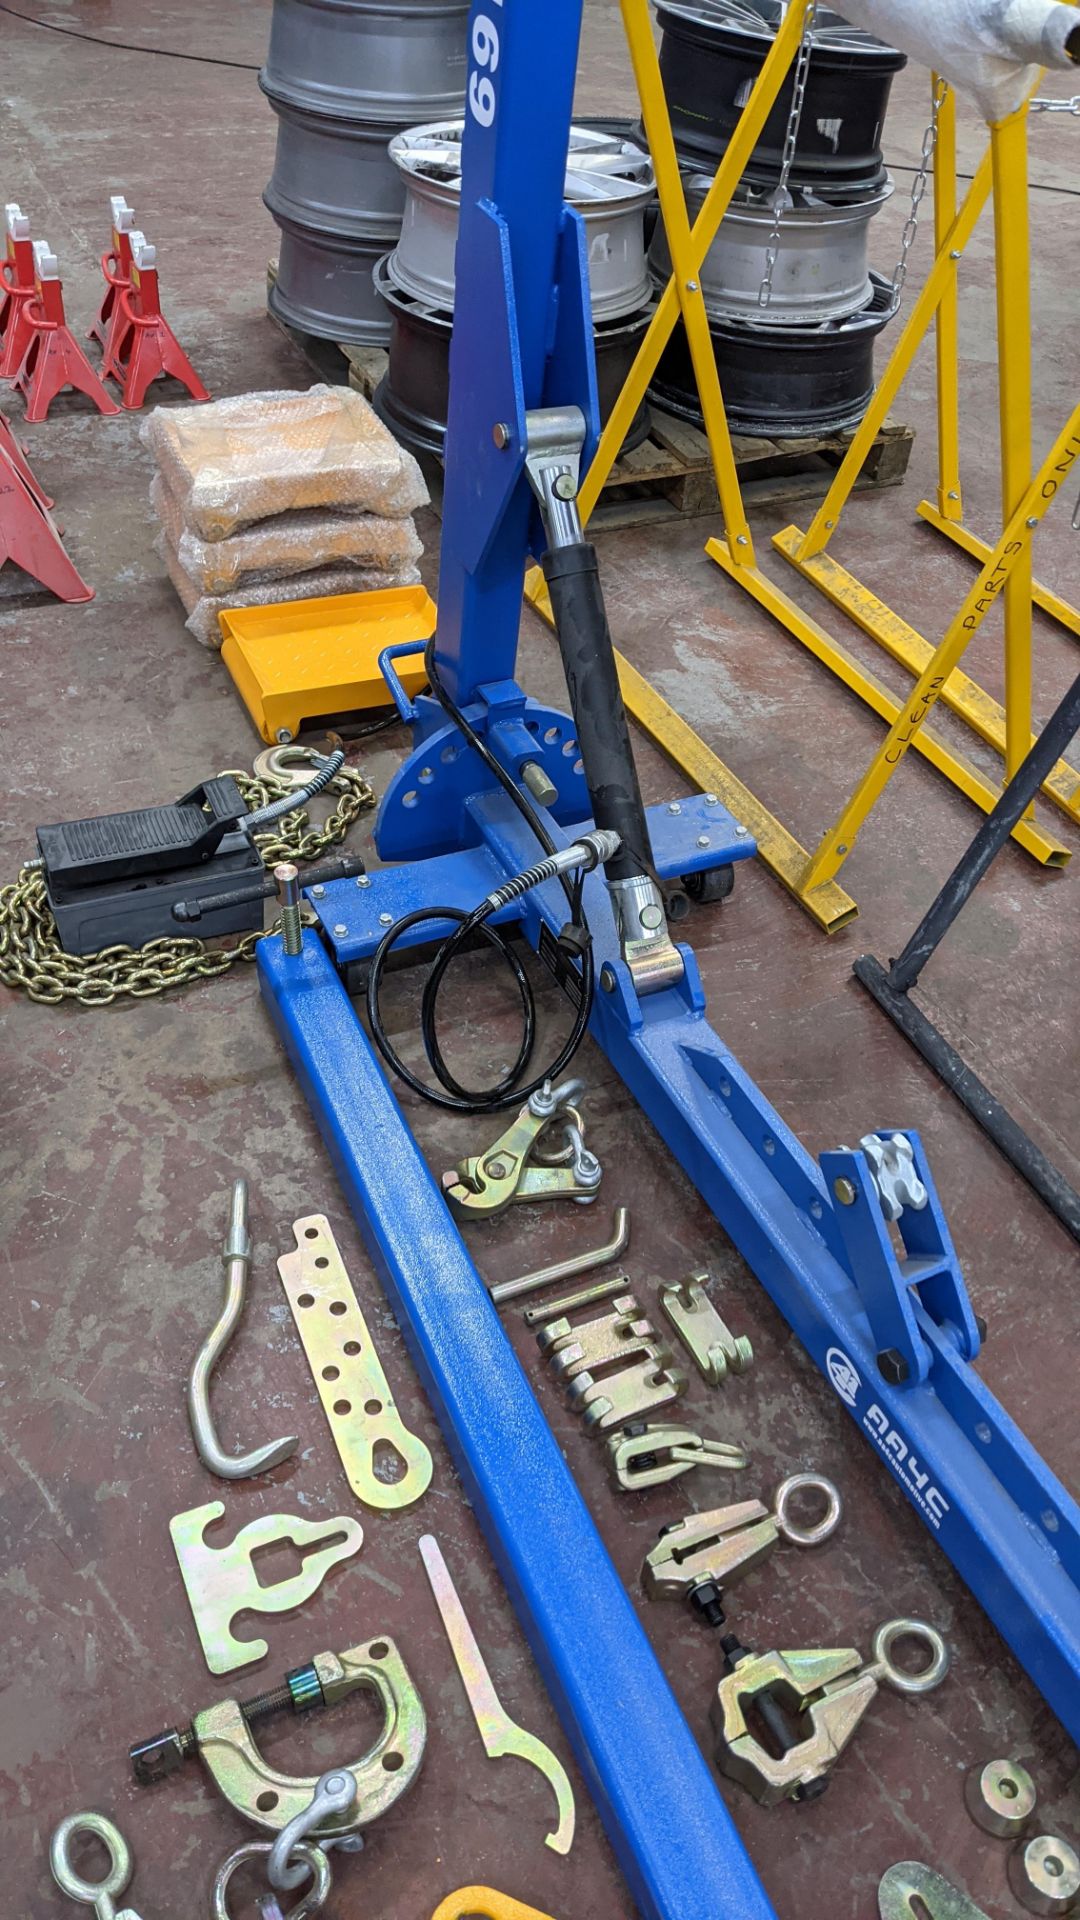 2019 AA4C auto repair bench model AA-ACR169. Please note this lot comprises the large blue metal fr - Image 20 of 32